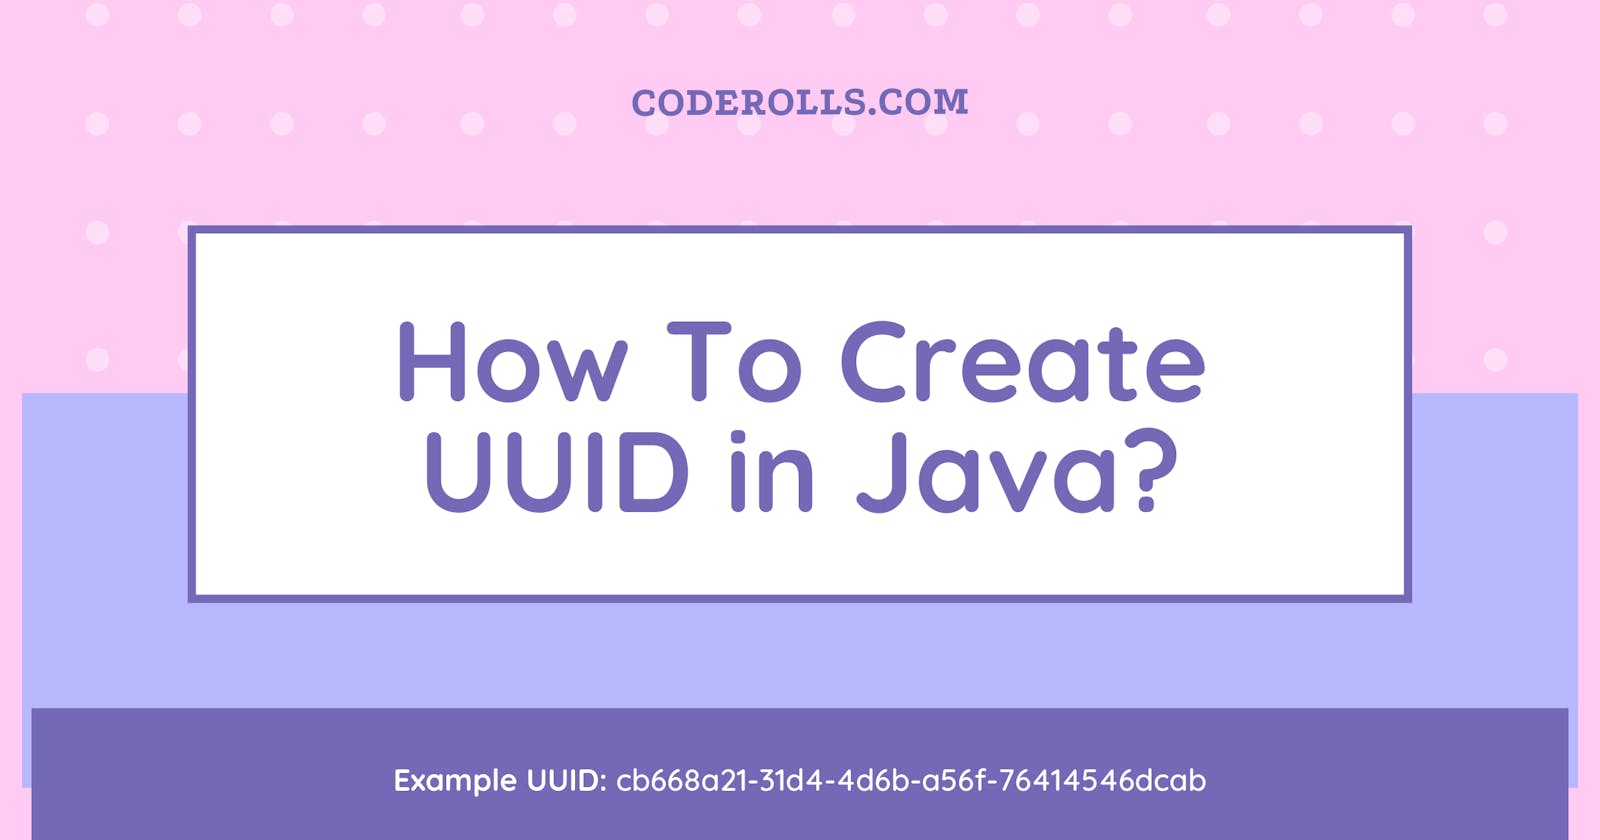 How To Create UUID in Java?